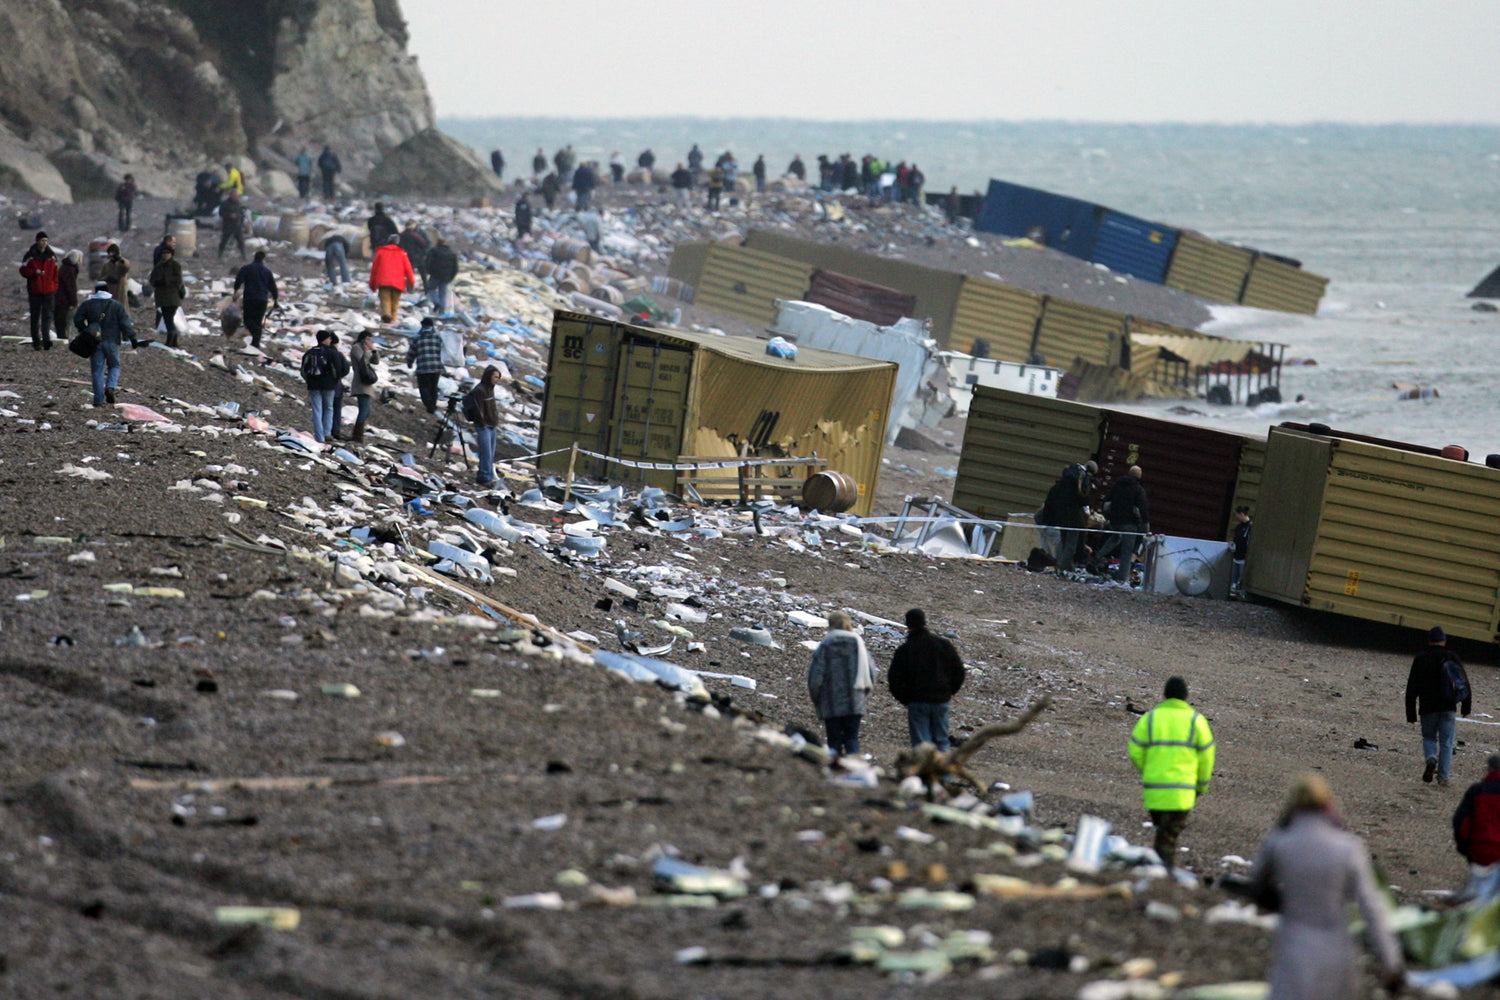 Twelve containers from the MSC Napoli cargo spill, can be seen lying on their sides on a pebble beach. Some have torn open. The contents of the containers are strew all along the length of the beach. People wearing winter clothes, walk amongst the debris.